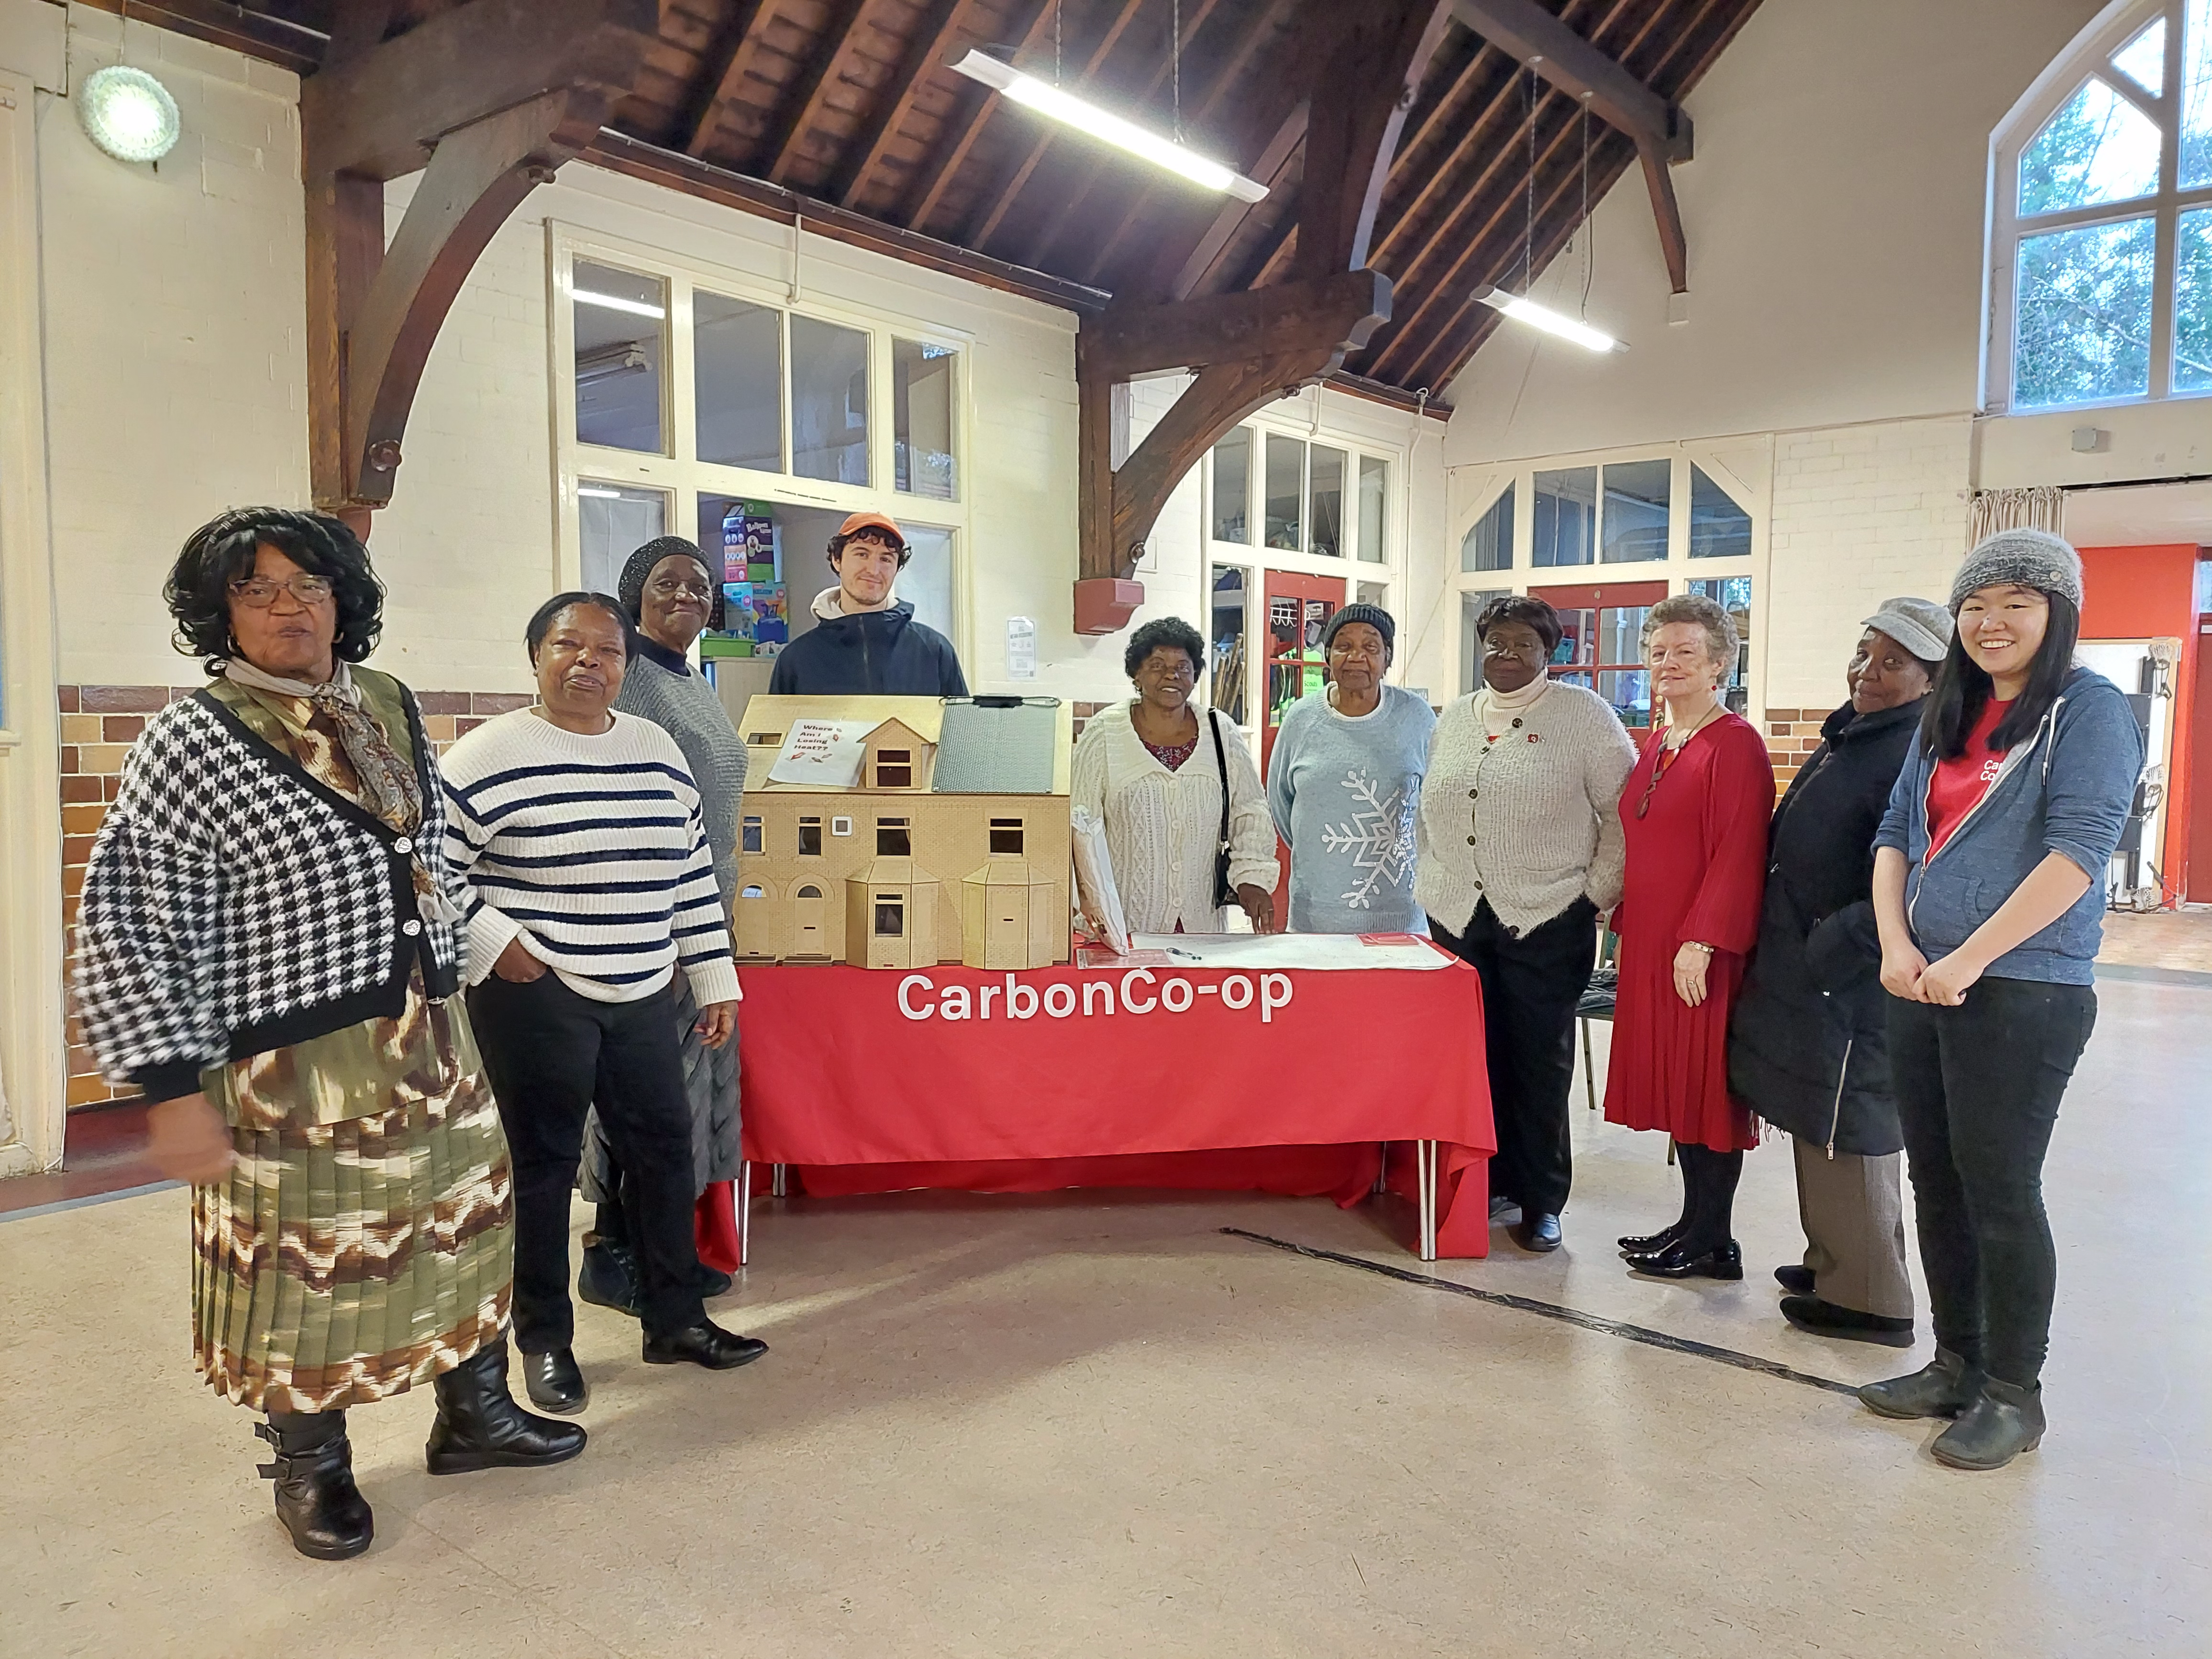 A photo of people taking part in a Carbon Co-op workshop at Hebden Bridget Town Hall.